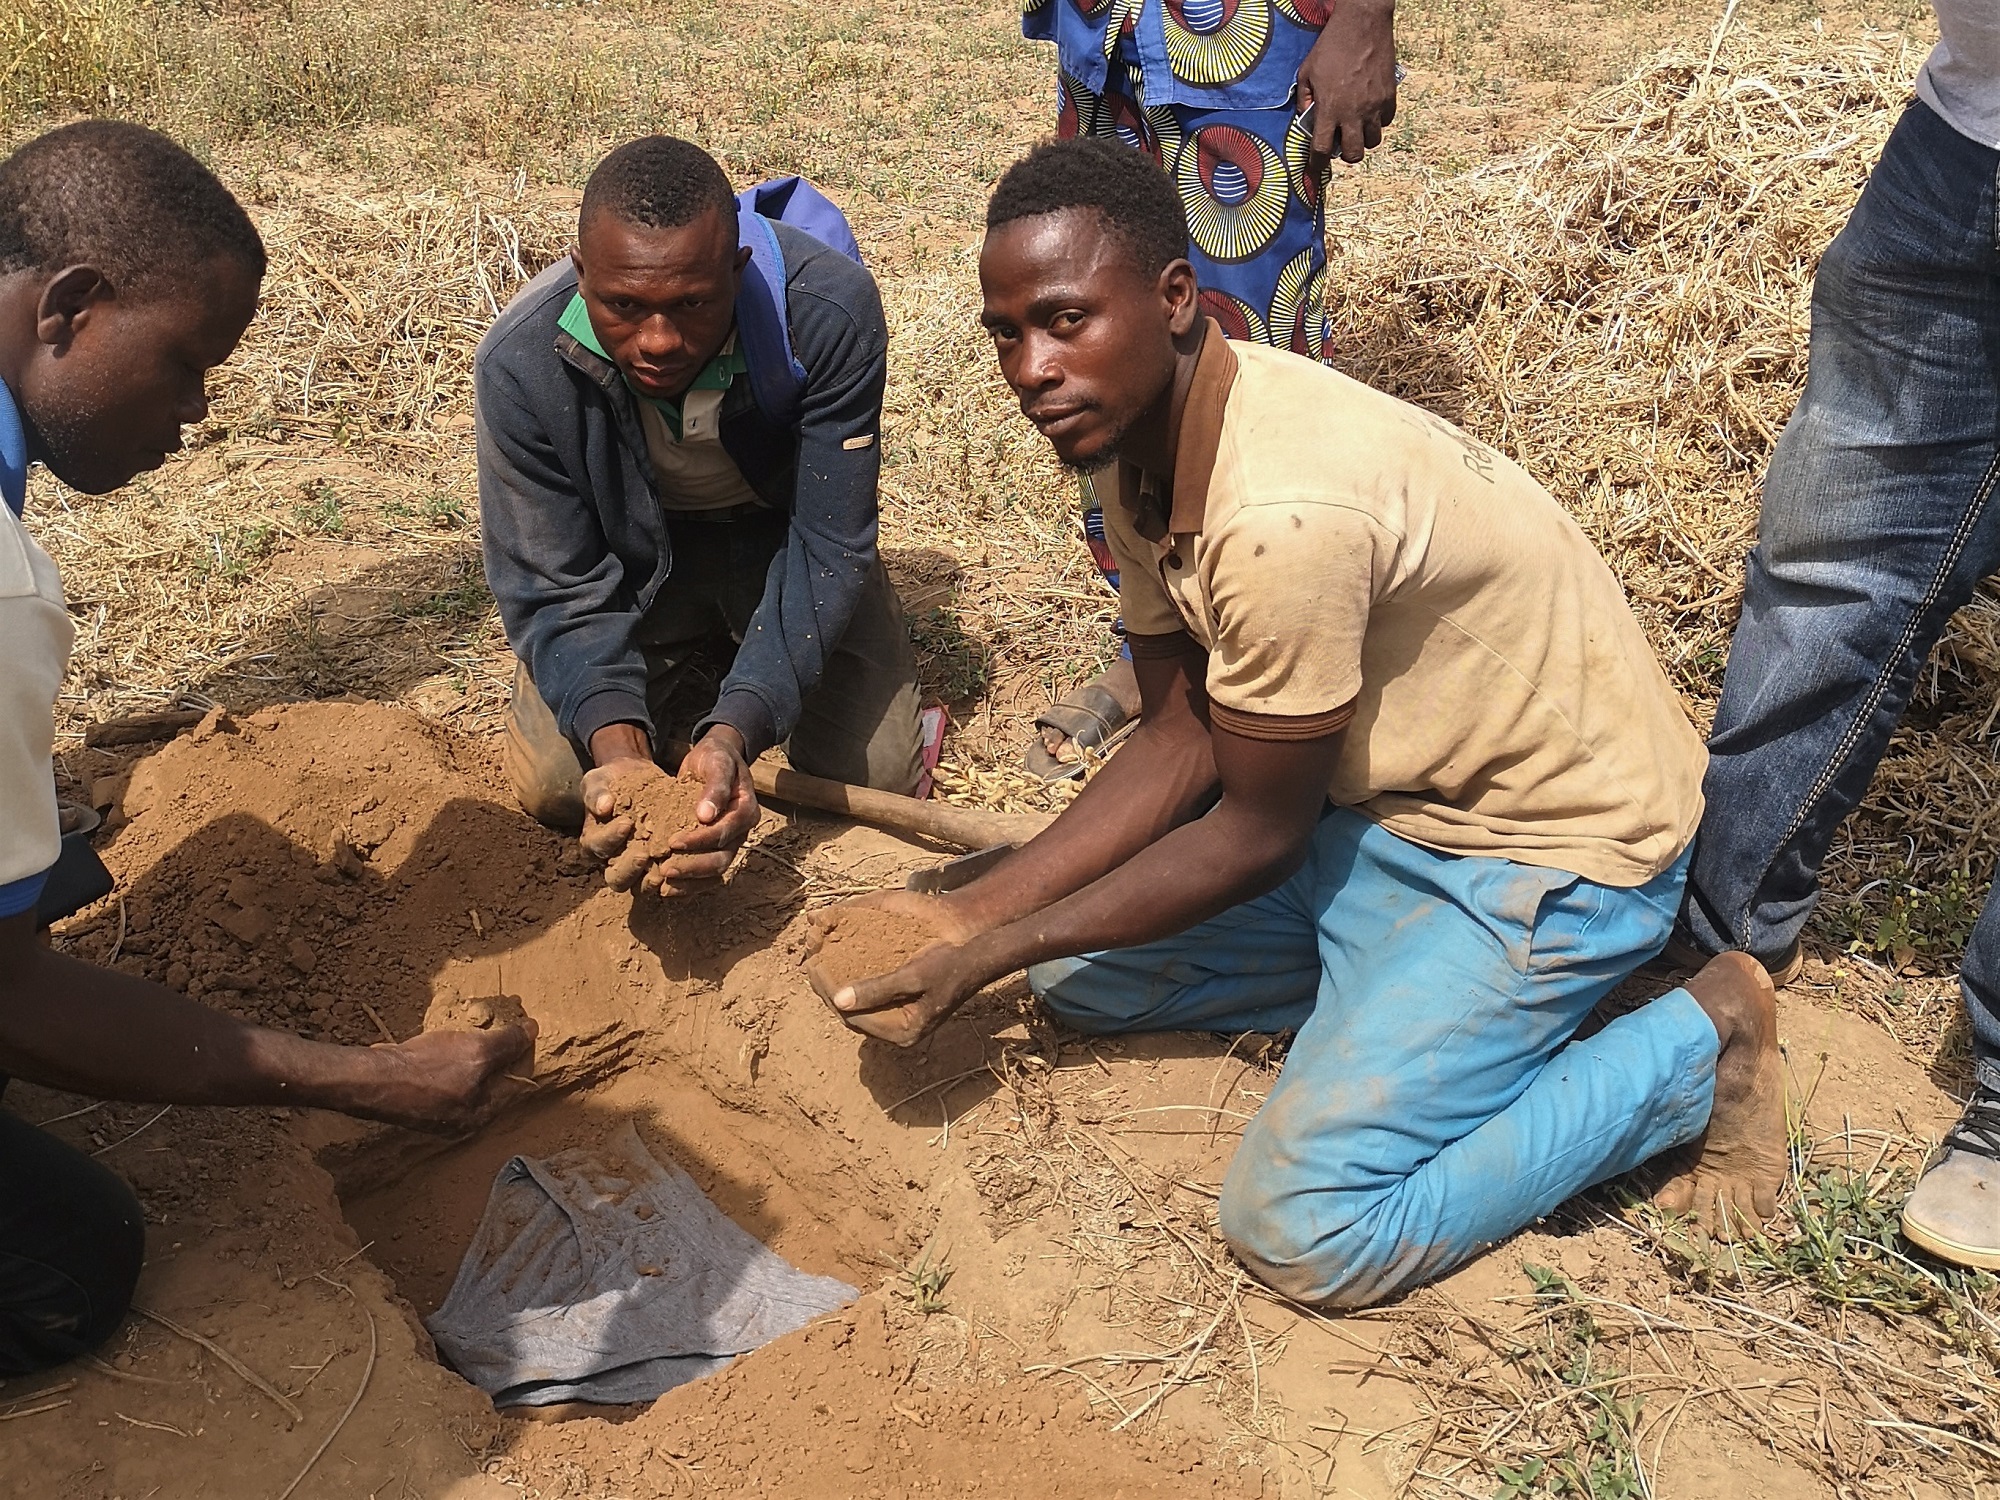 OBEPAB farmers burying cotton underwear to assess their soil health using the ‘soil your undies’ method. Credit PAN UK.